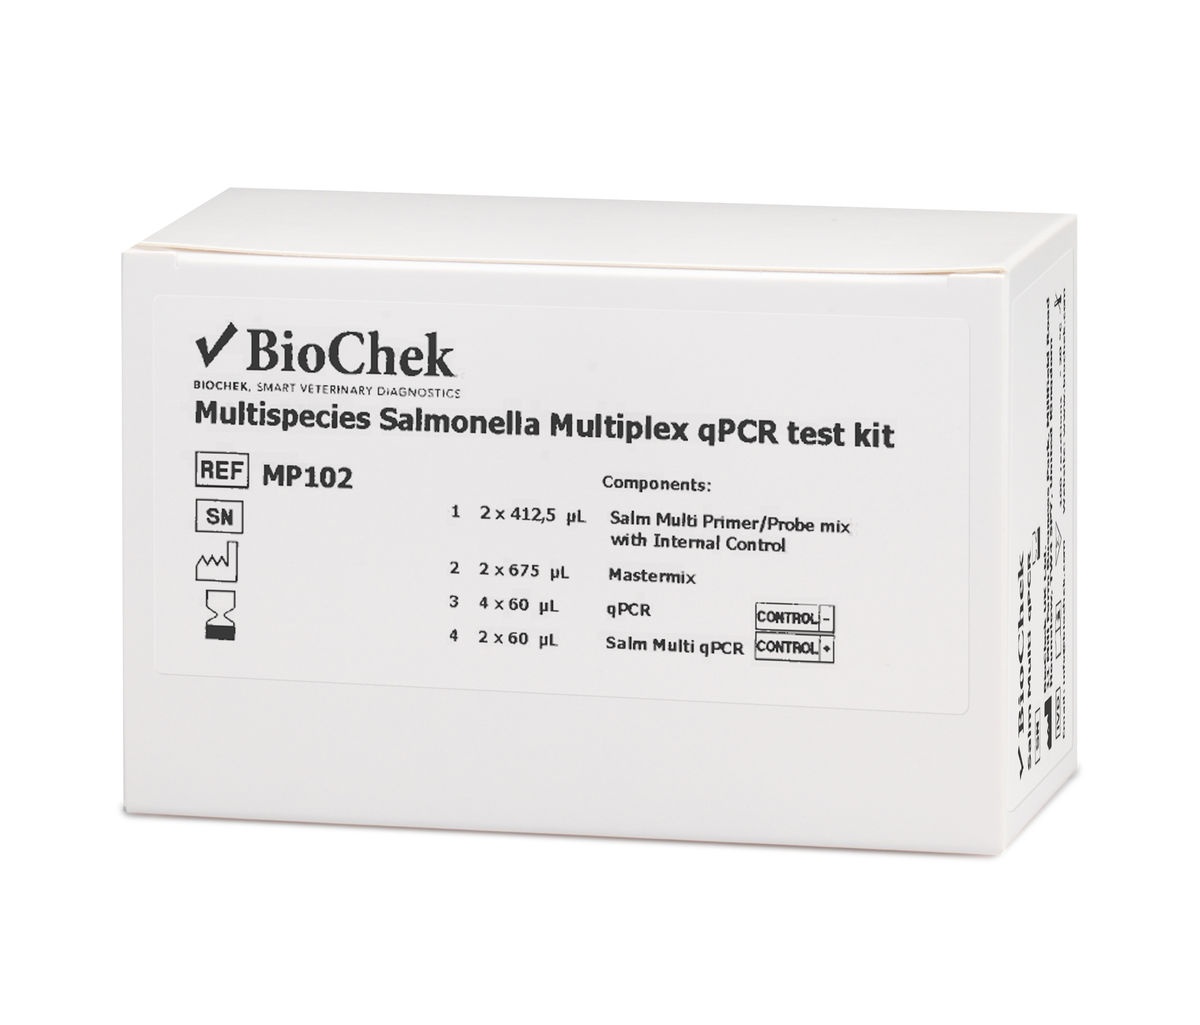 NOW AVAILABLE: Multispecies Salmonella Multiplex DNA test kit